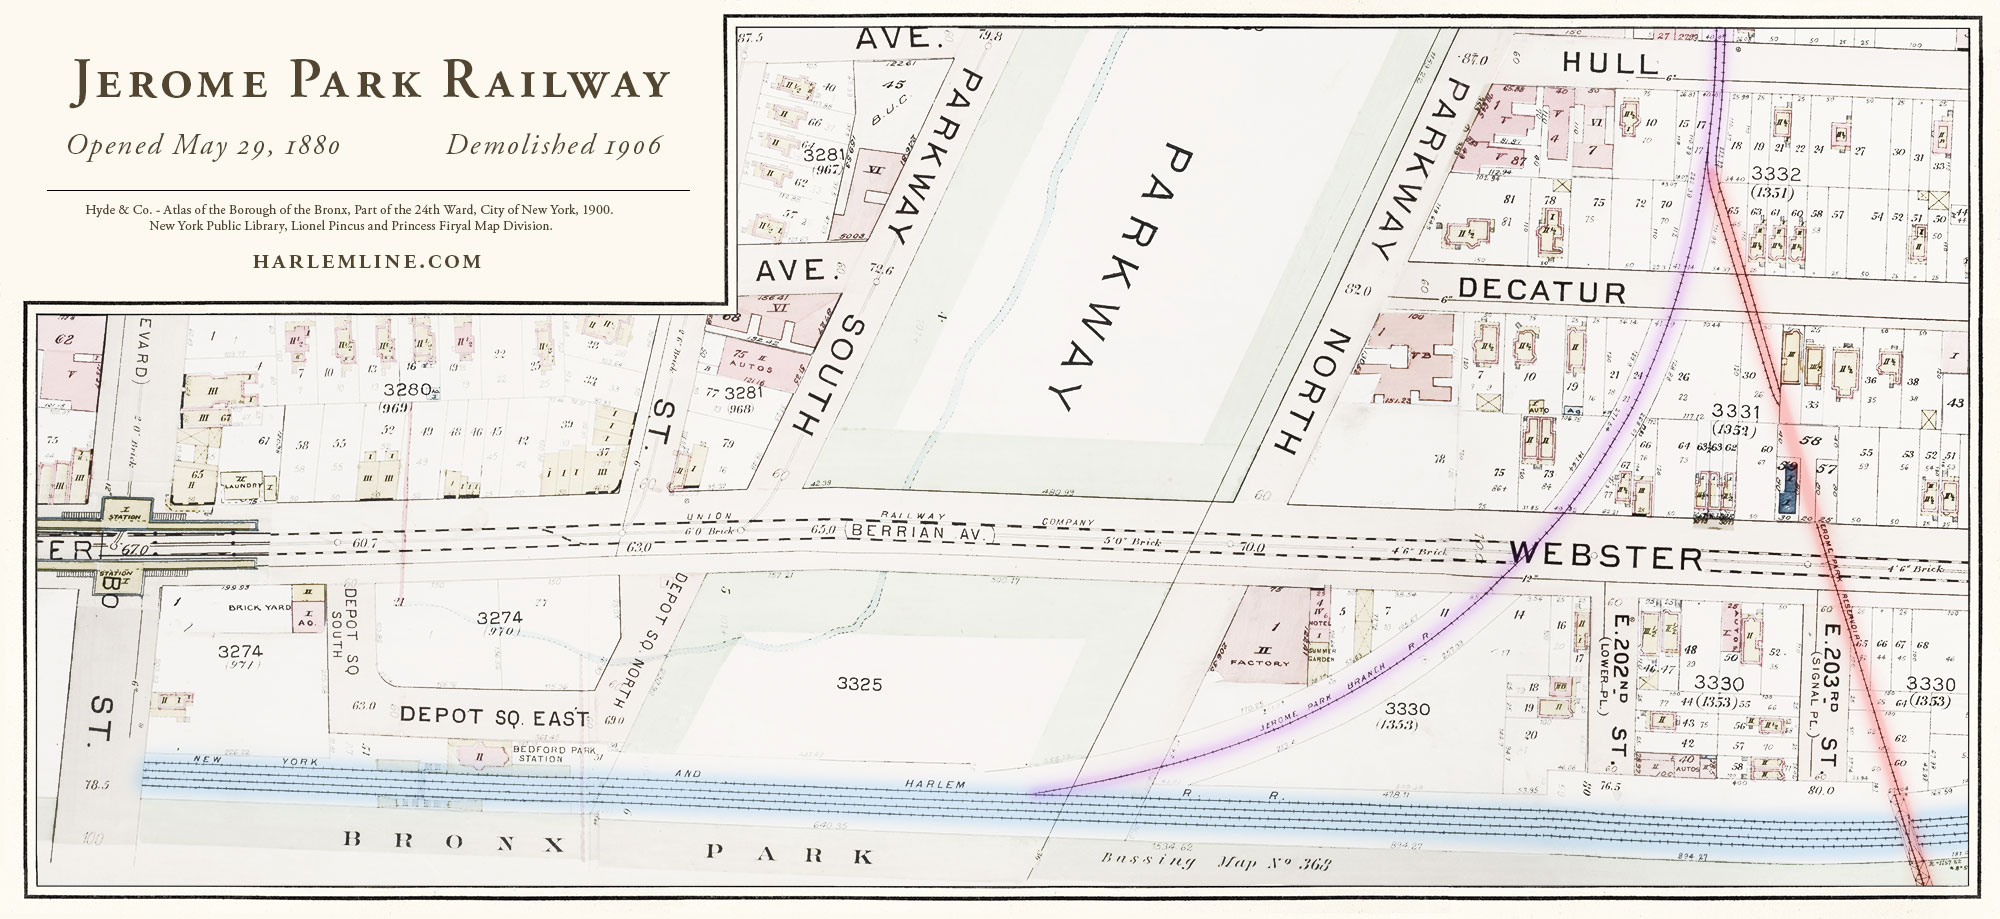 Map of the Jerome Park Railway showing part of the temporary line for disposing of excavated materials